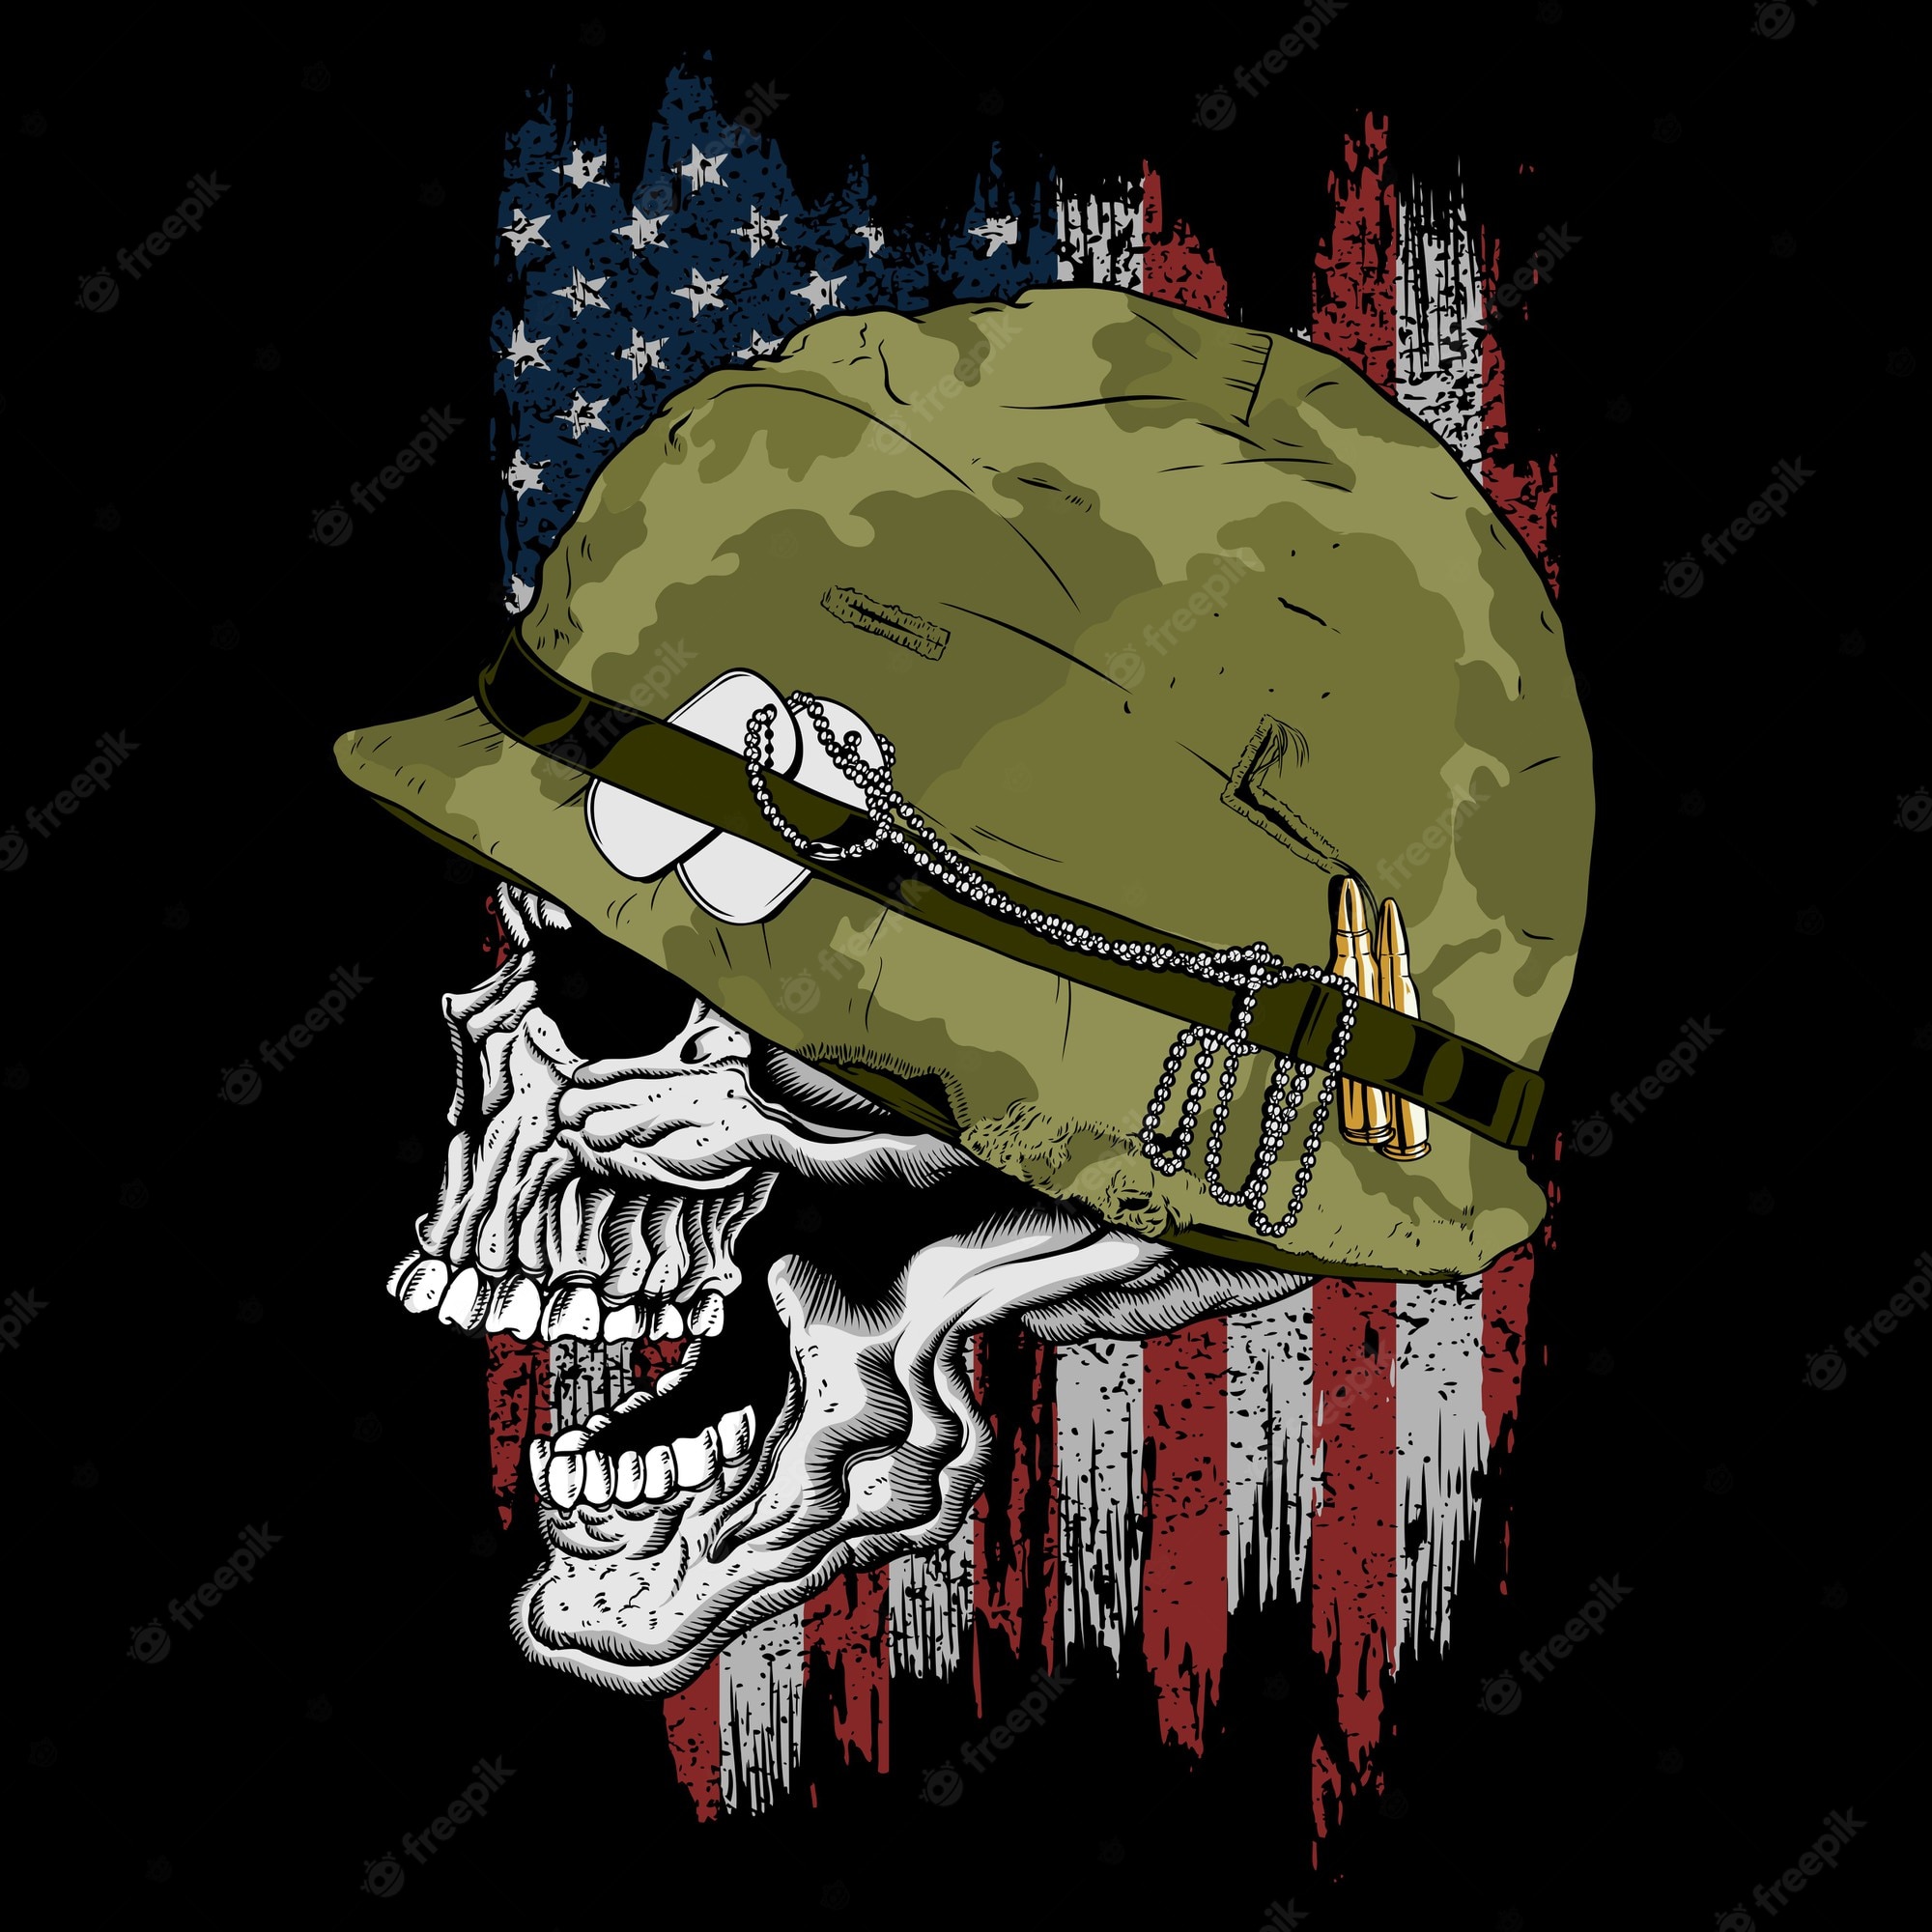 Skull army soldier Vectors & Illustrations for Free Download